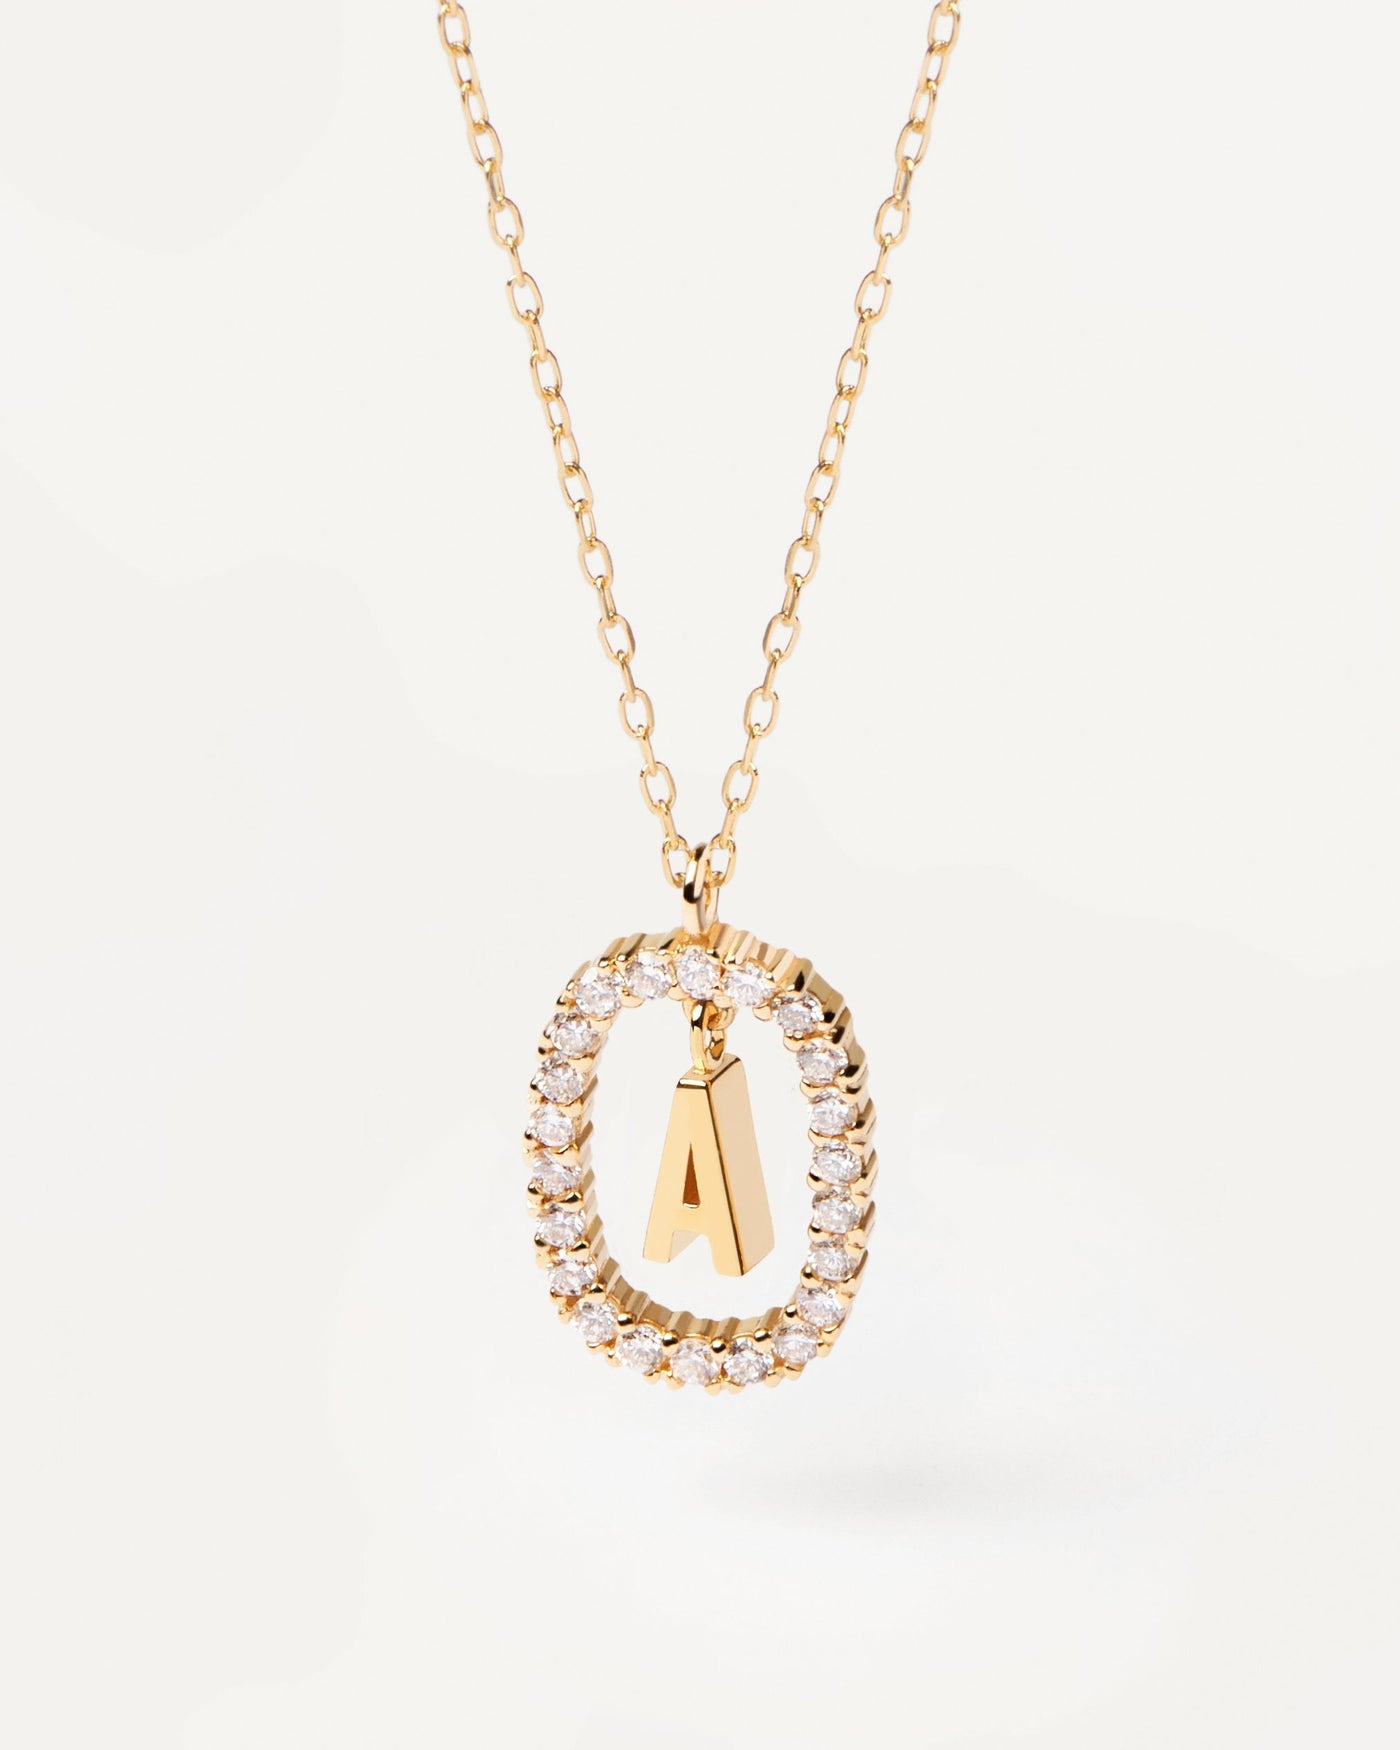 Buy 18K Recycled Gold and Lab-grown diamonds necklaces. High-end materials with a lifetime personal assistance. Free Shipping.